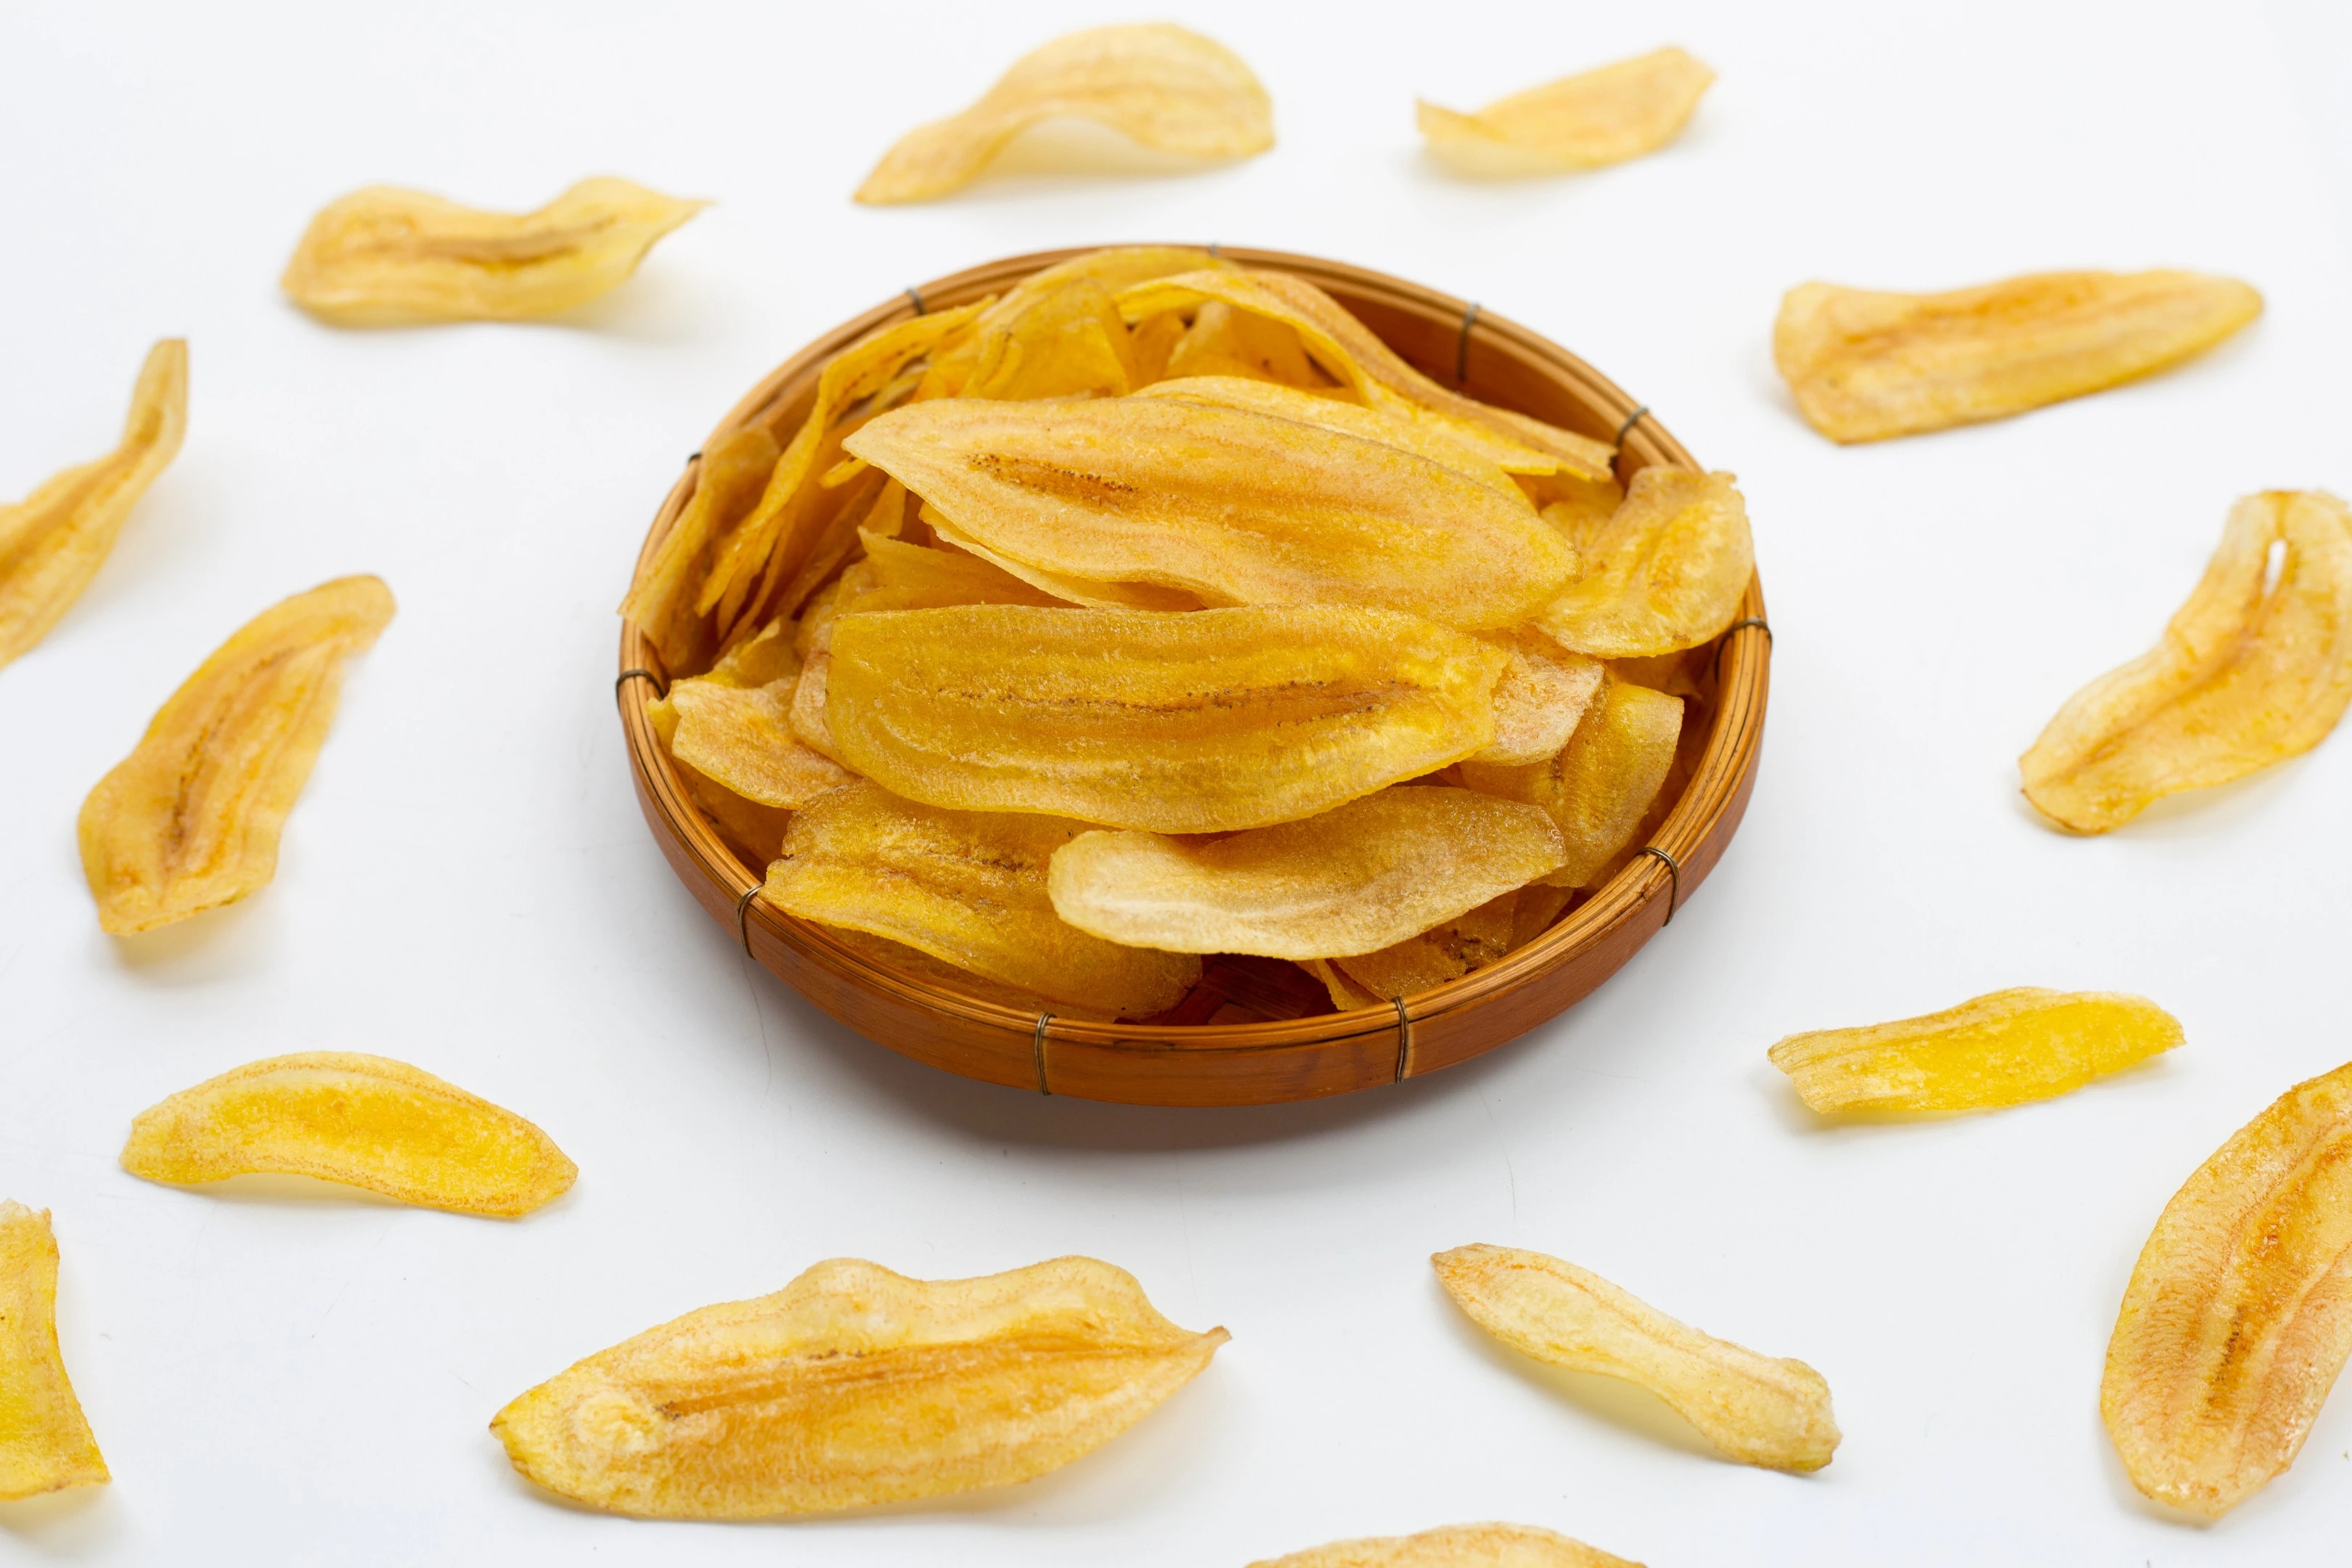 Dehydrated banana chips on white background